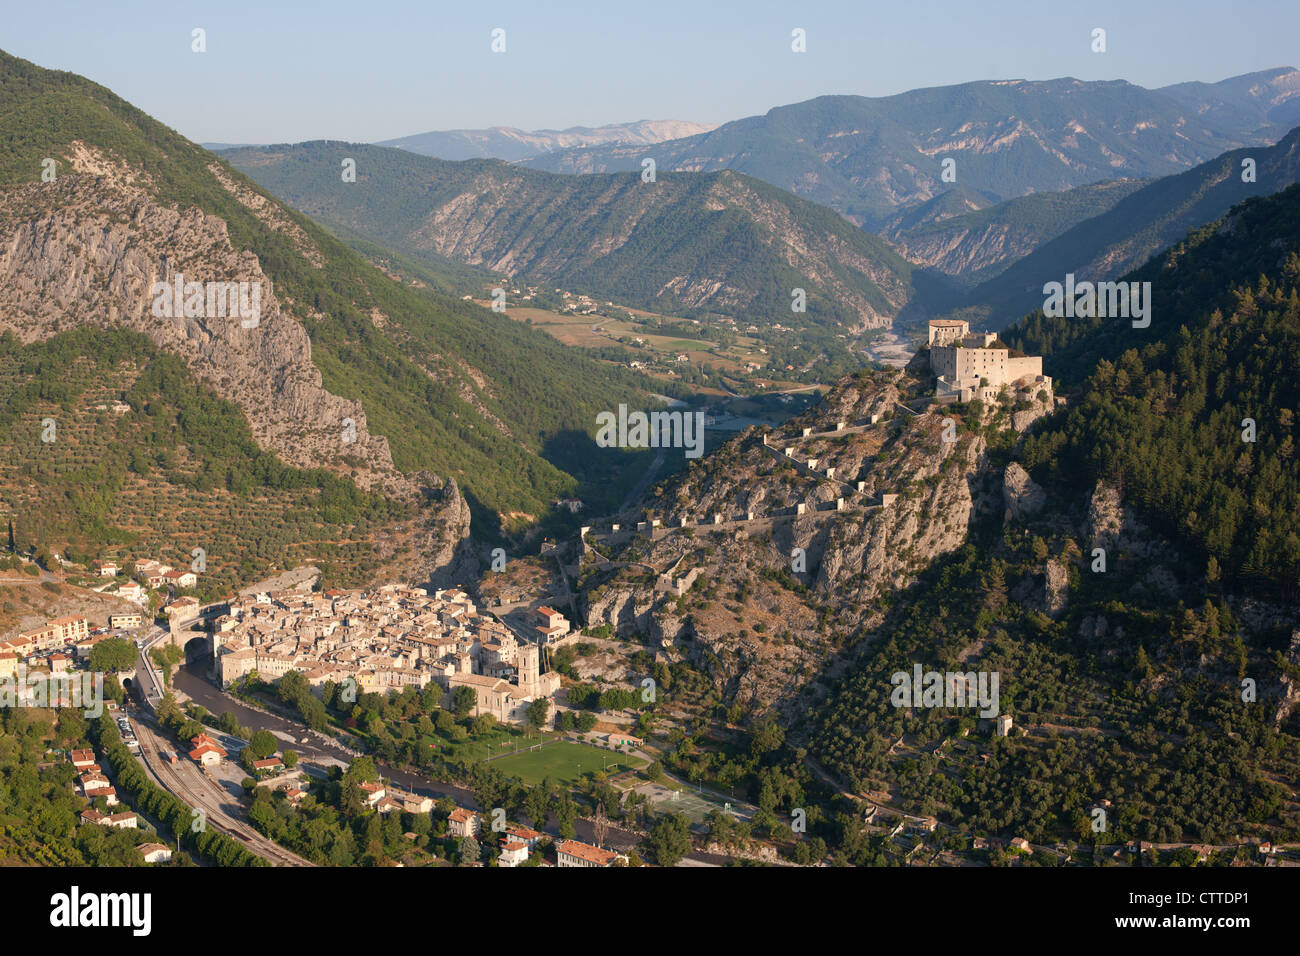 AERIAL VIEW. The citadel of Entrevaux dominated by its castle on a strategically narrow passage in the Var Valley, Alpes-de-Haute-Provence, France. Stock Photo